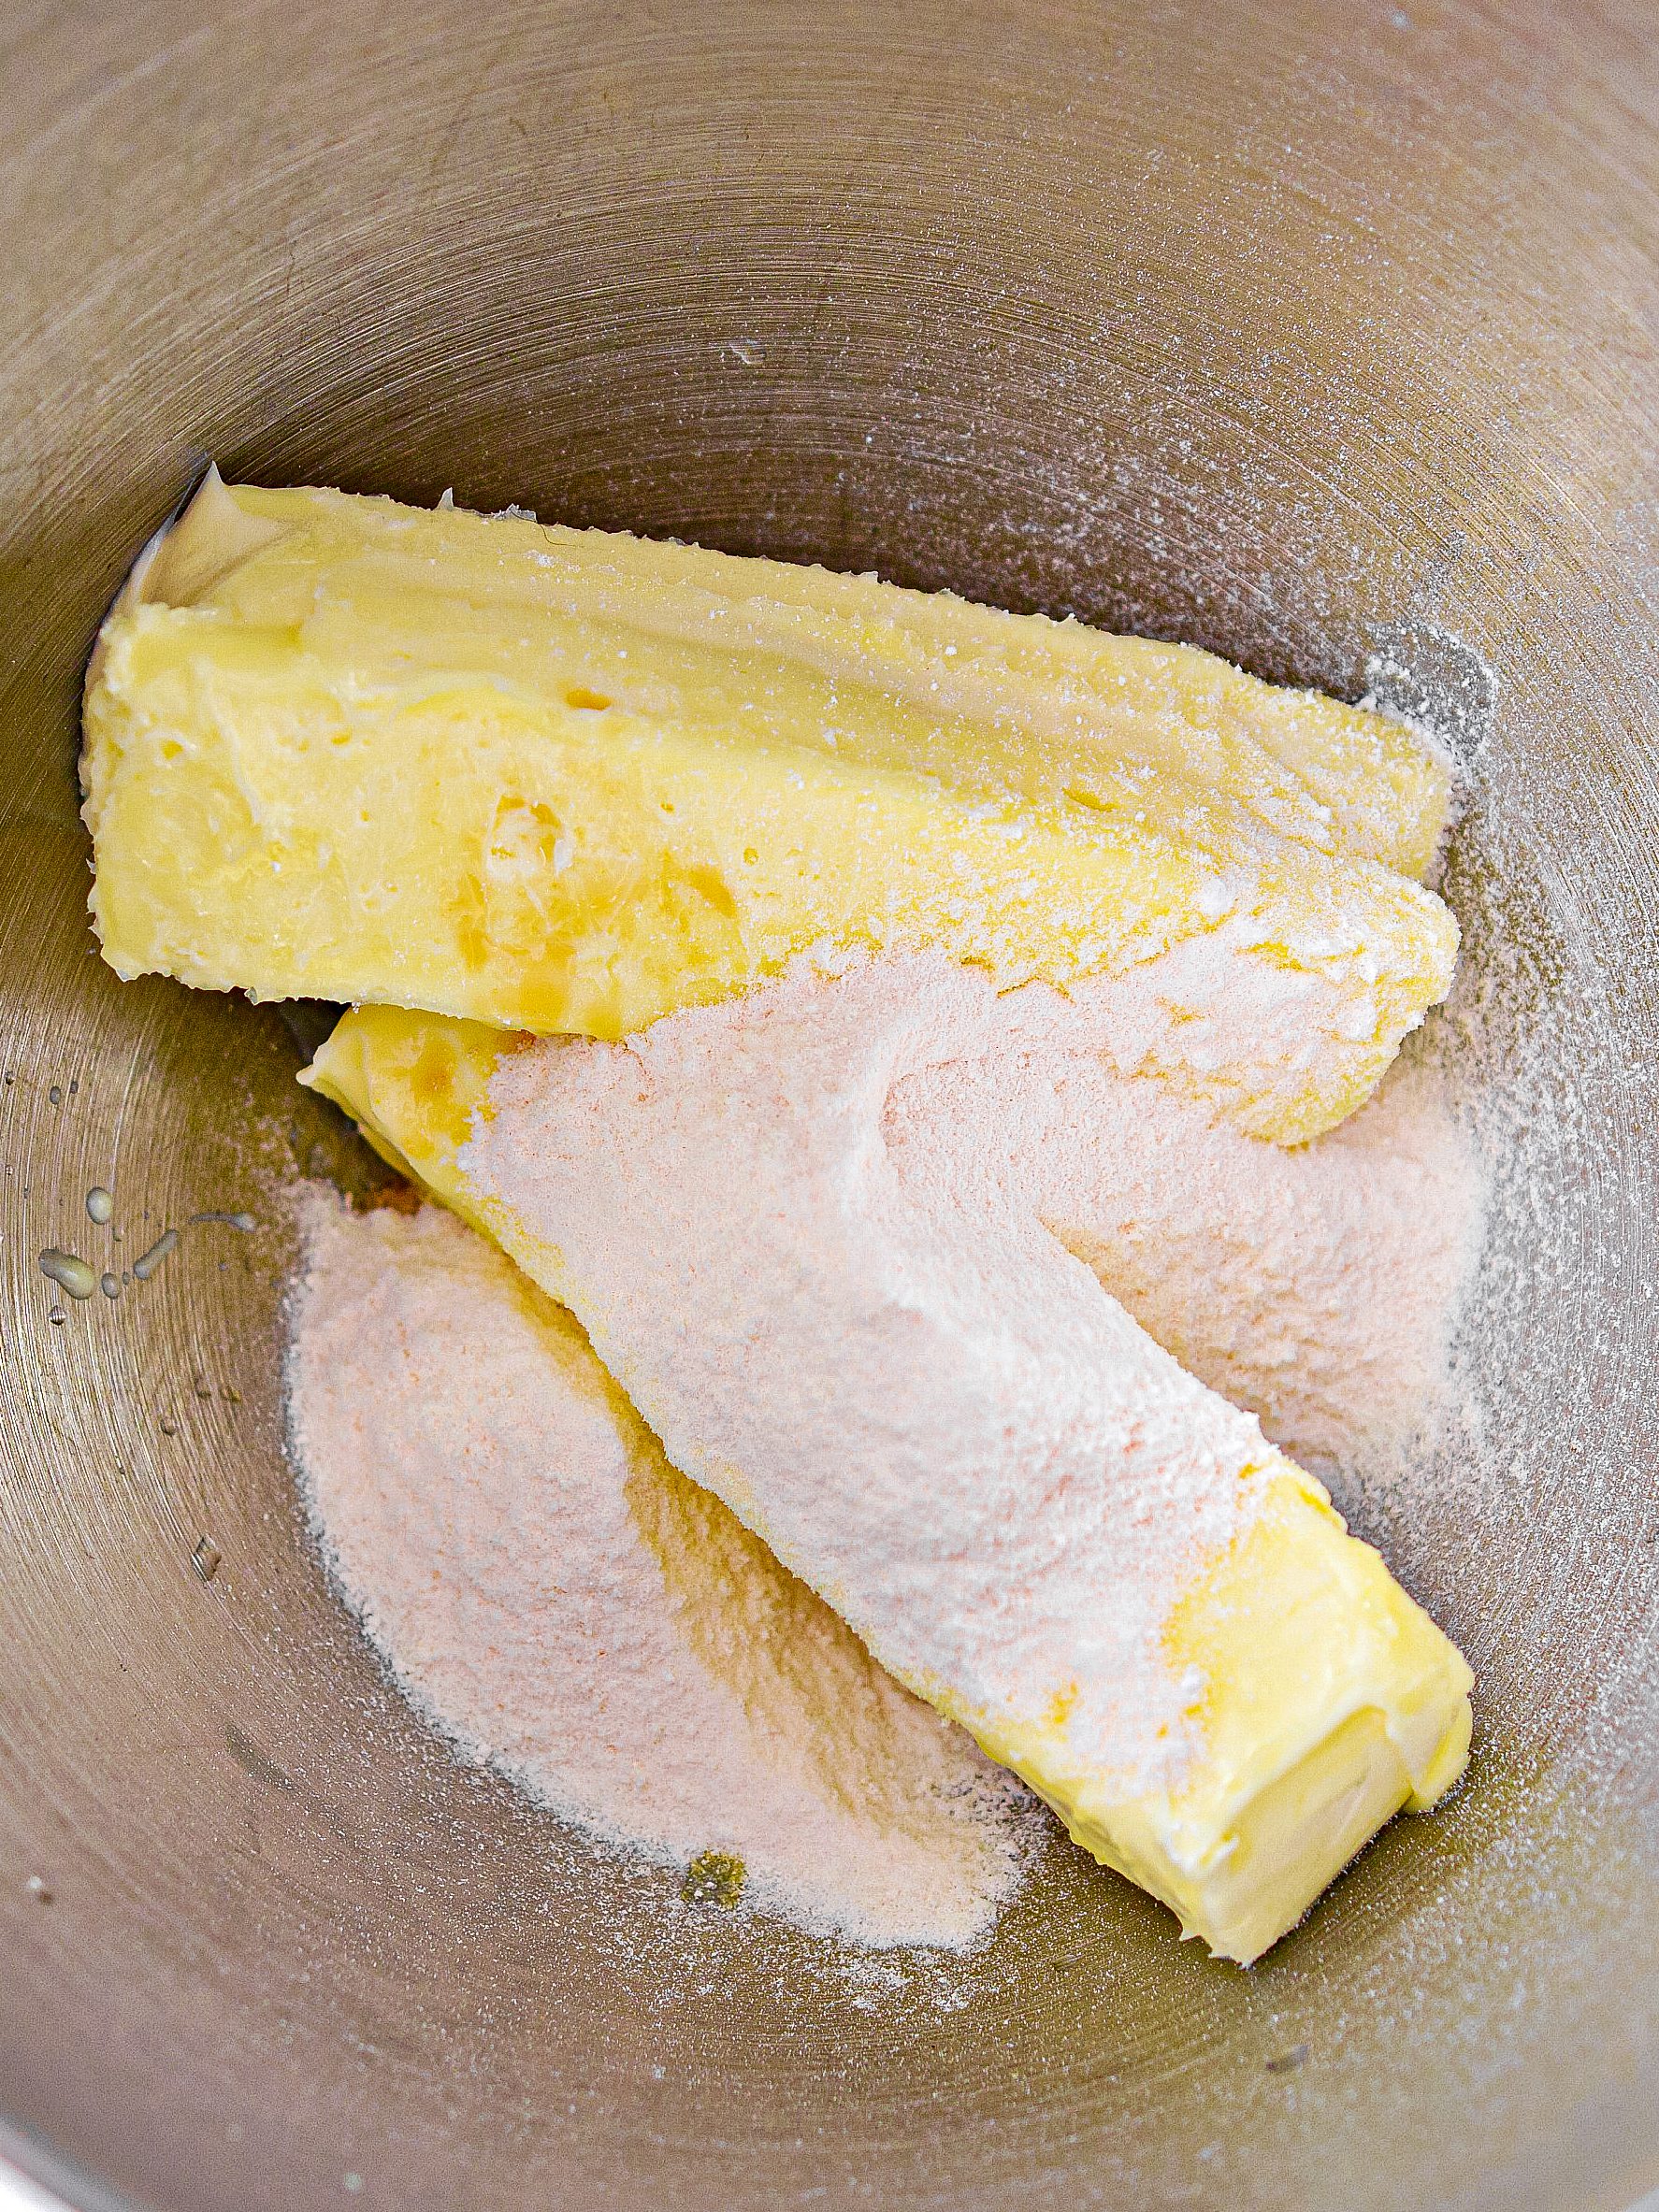 Mix together the 2 sticks of butter and the cheesecake pudding mix together until creamy.